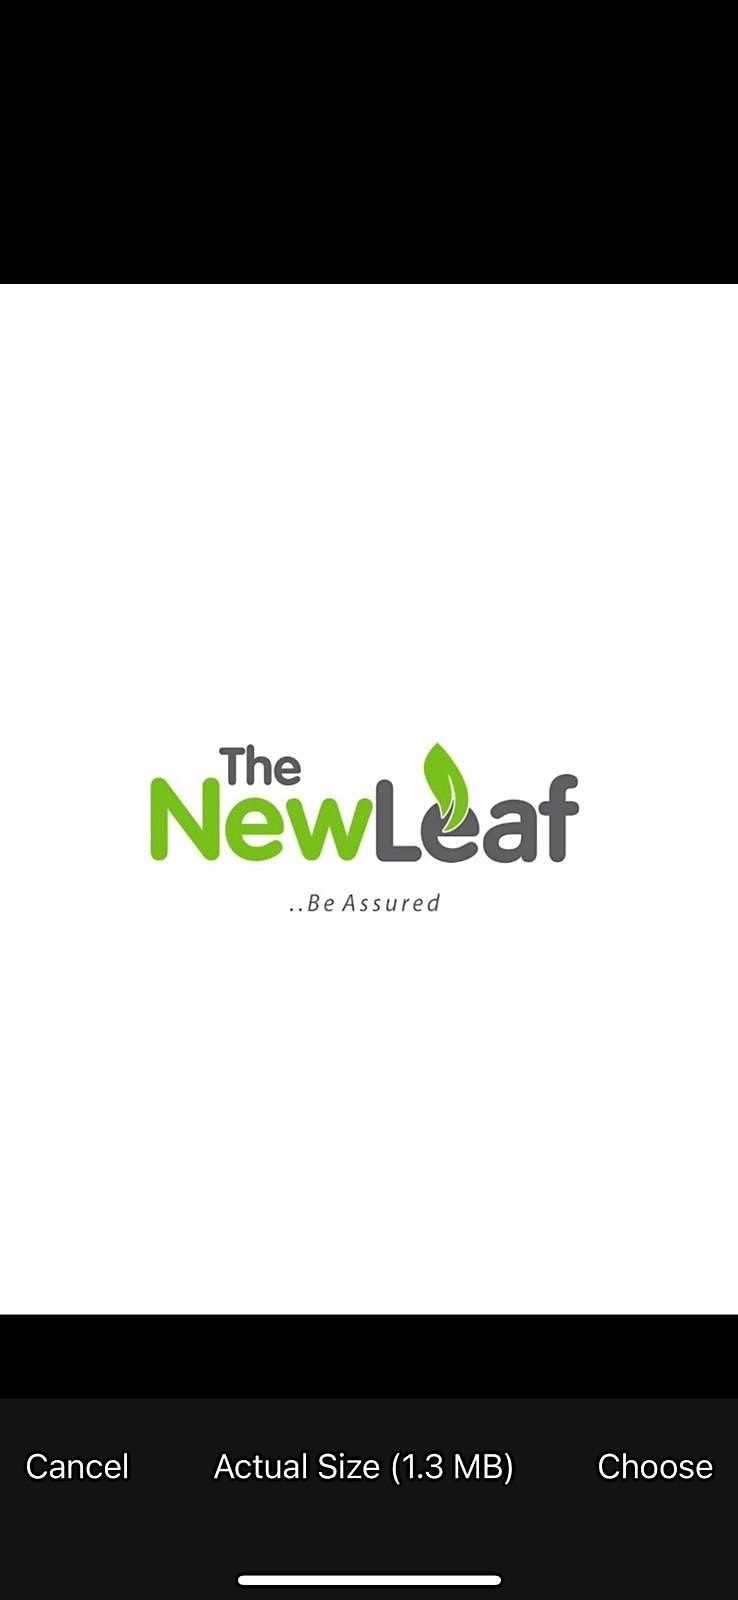 The Newleaf - Navigating your Network